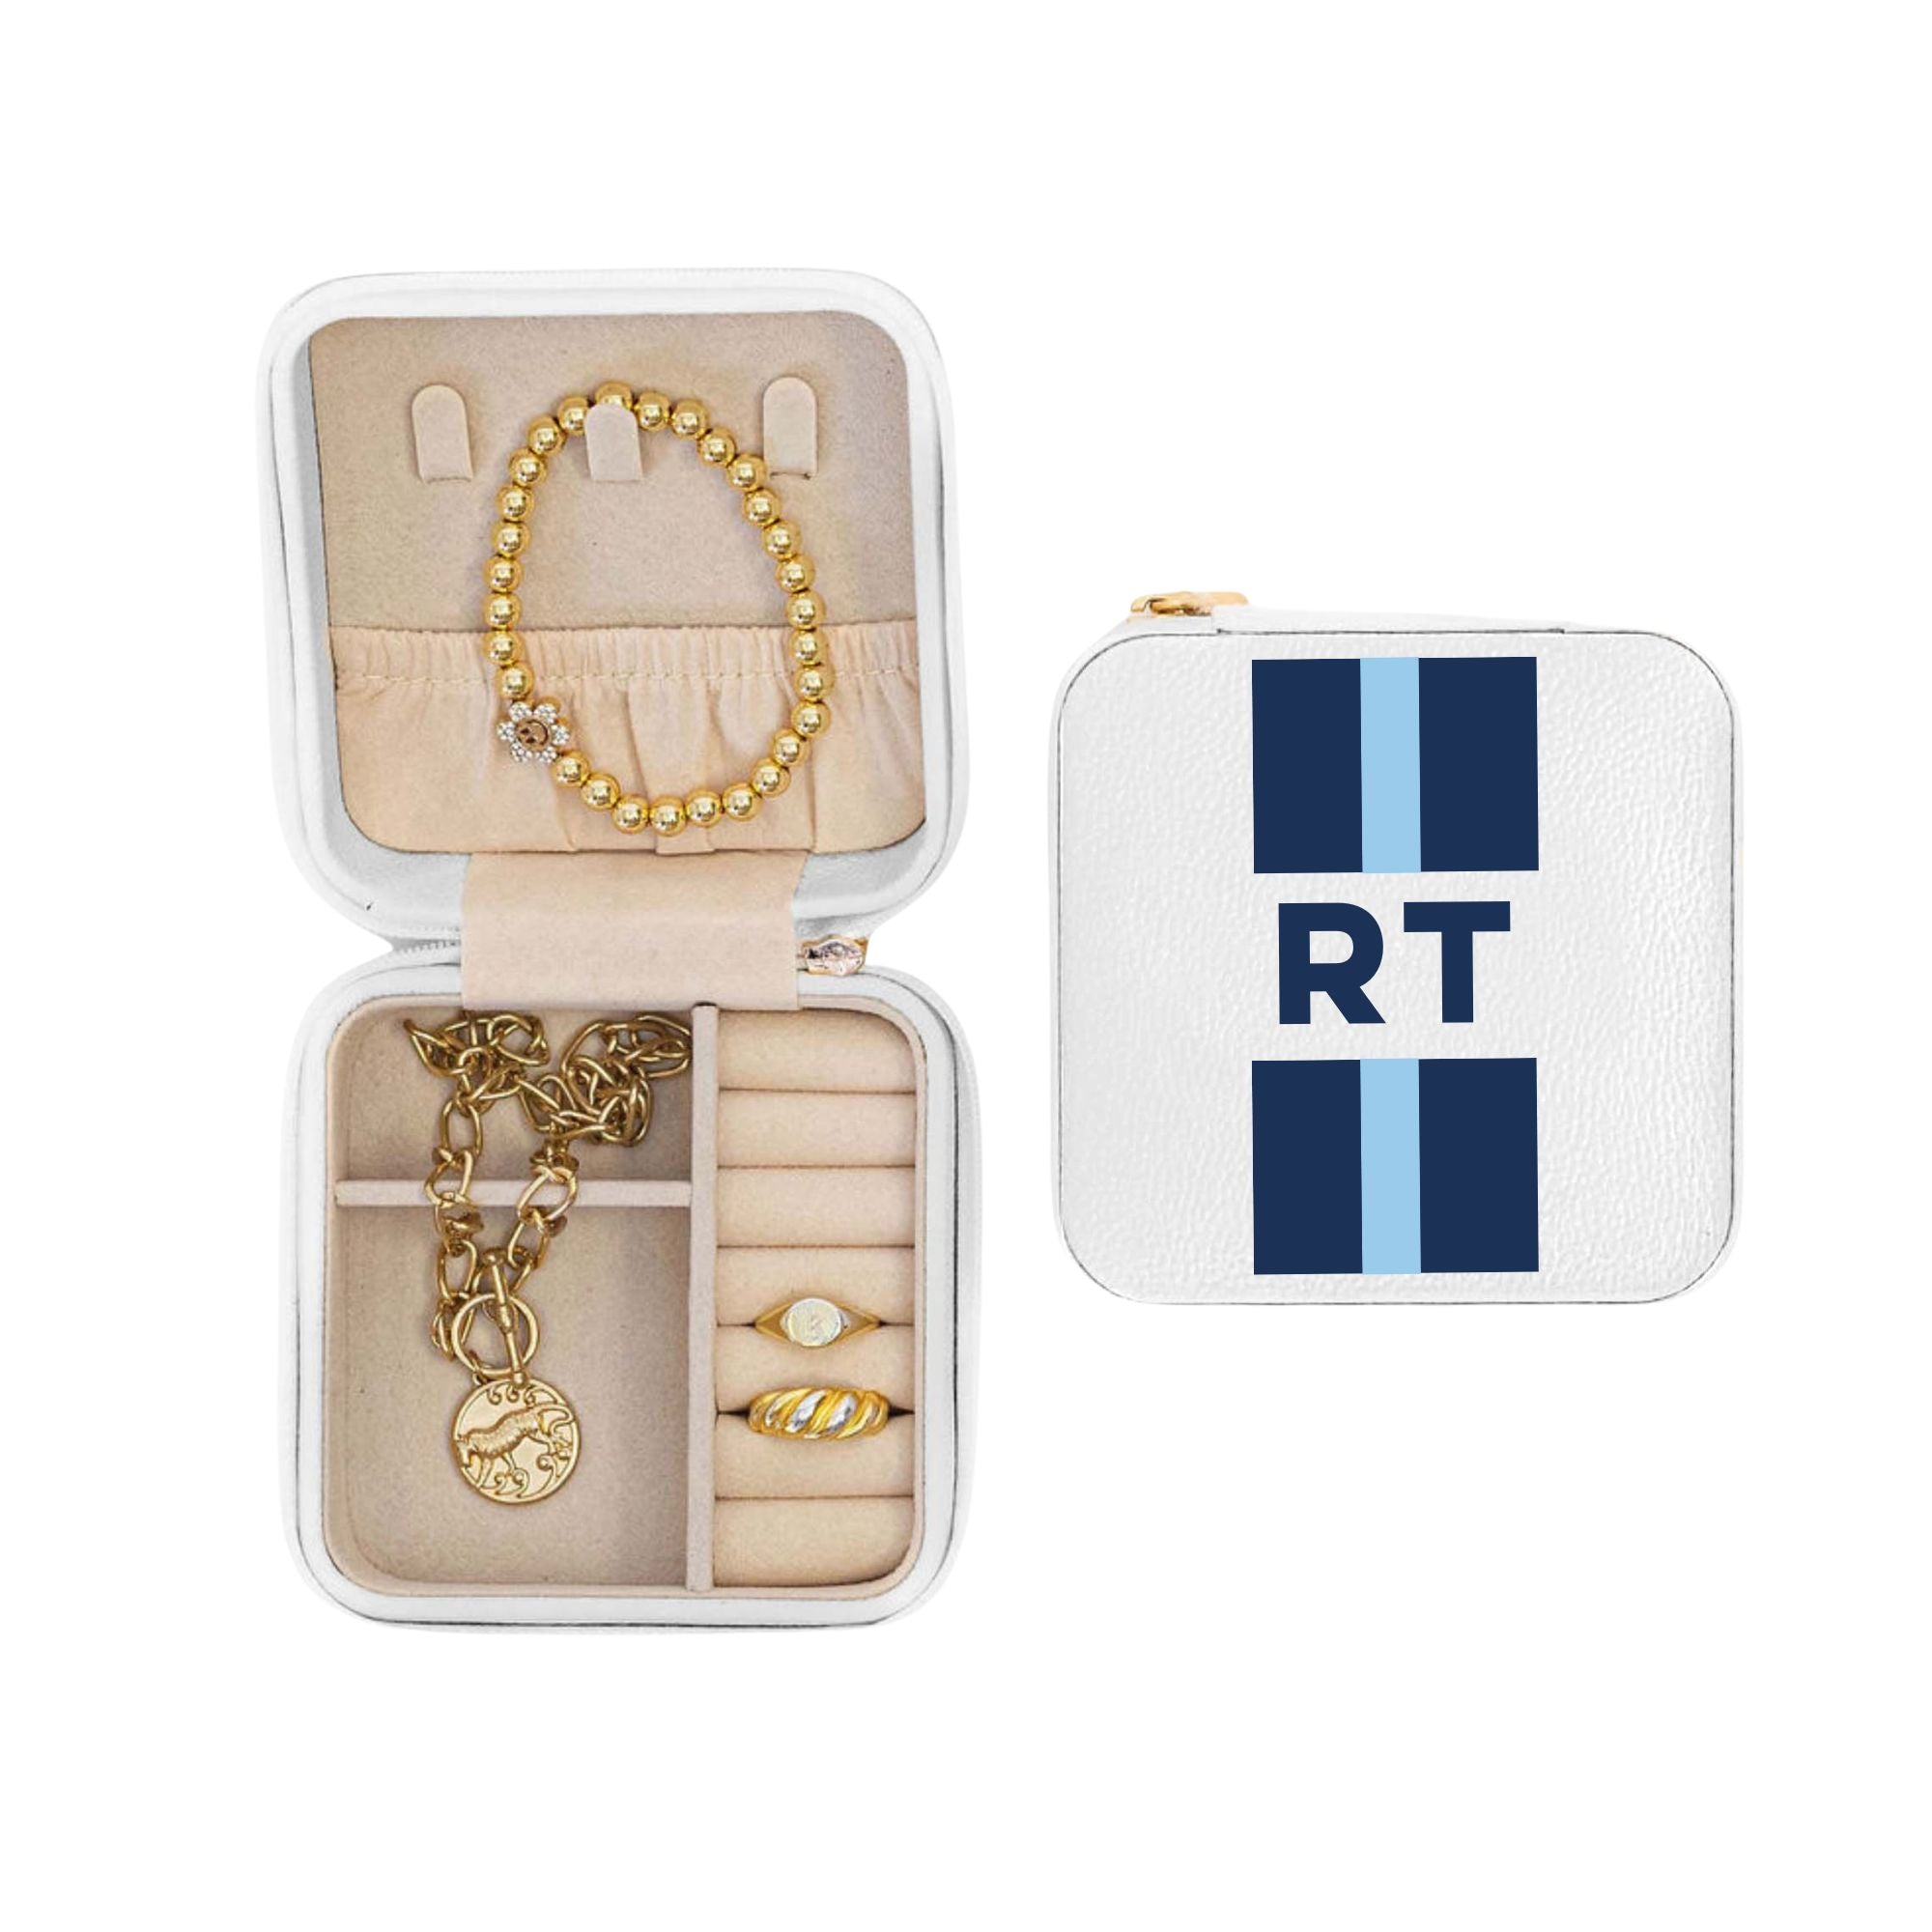 An open jewelry case is filled with jewelry and sits next to a closed case with a blue stripe monogram design.